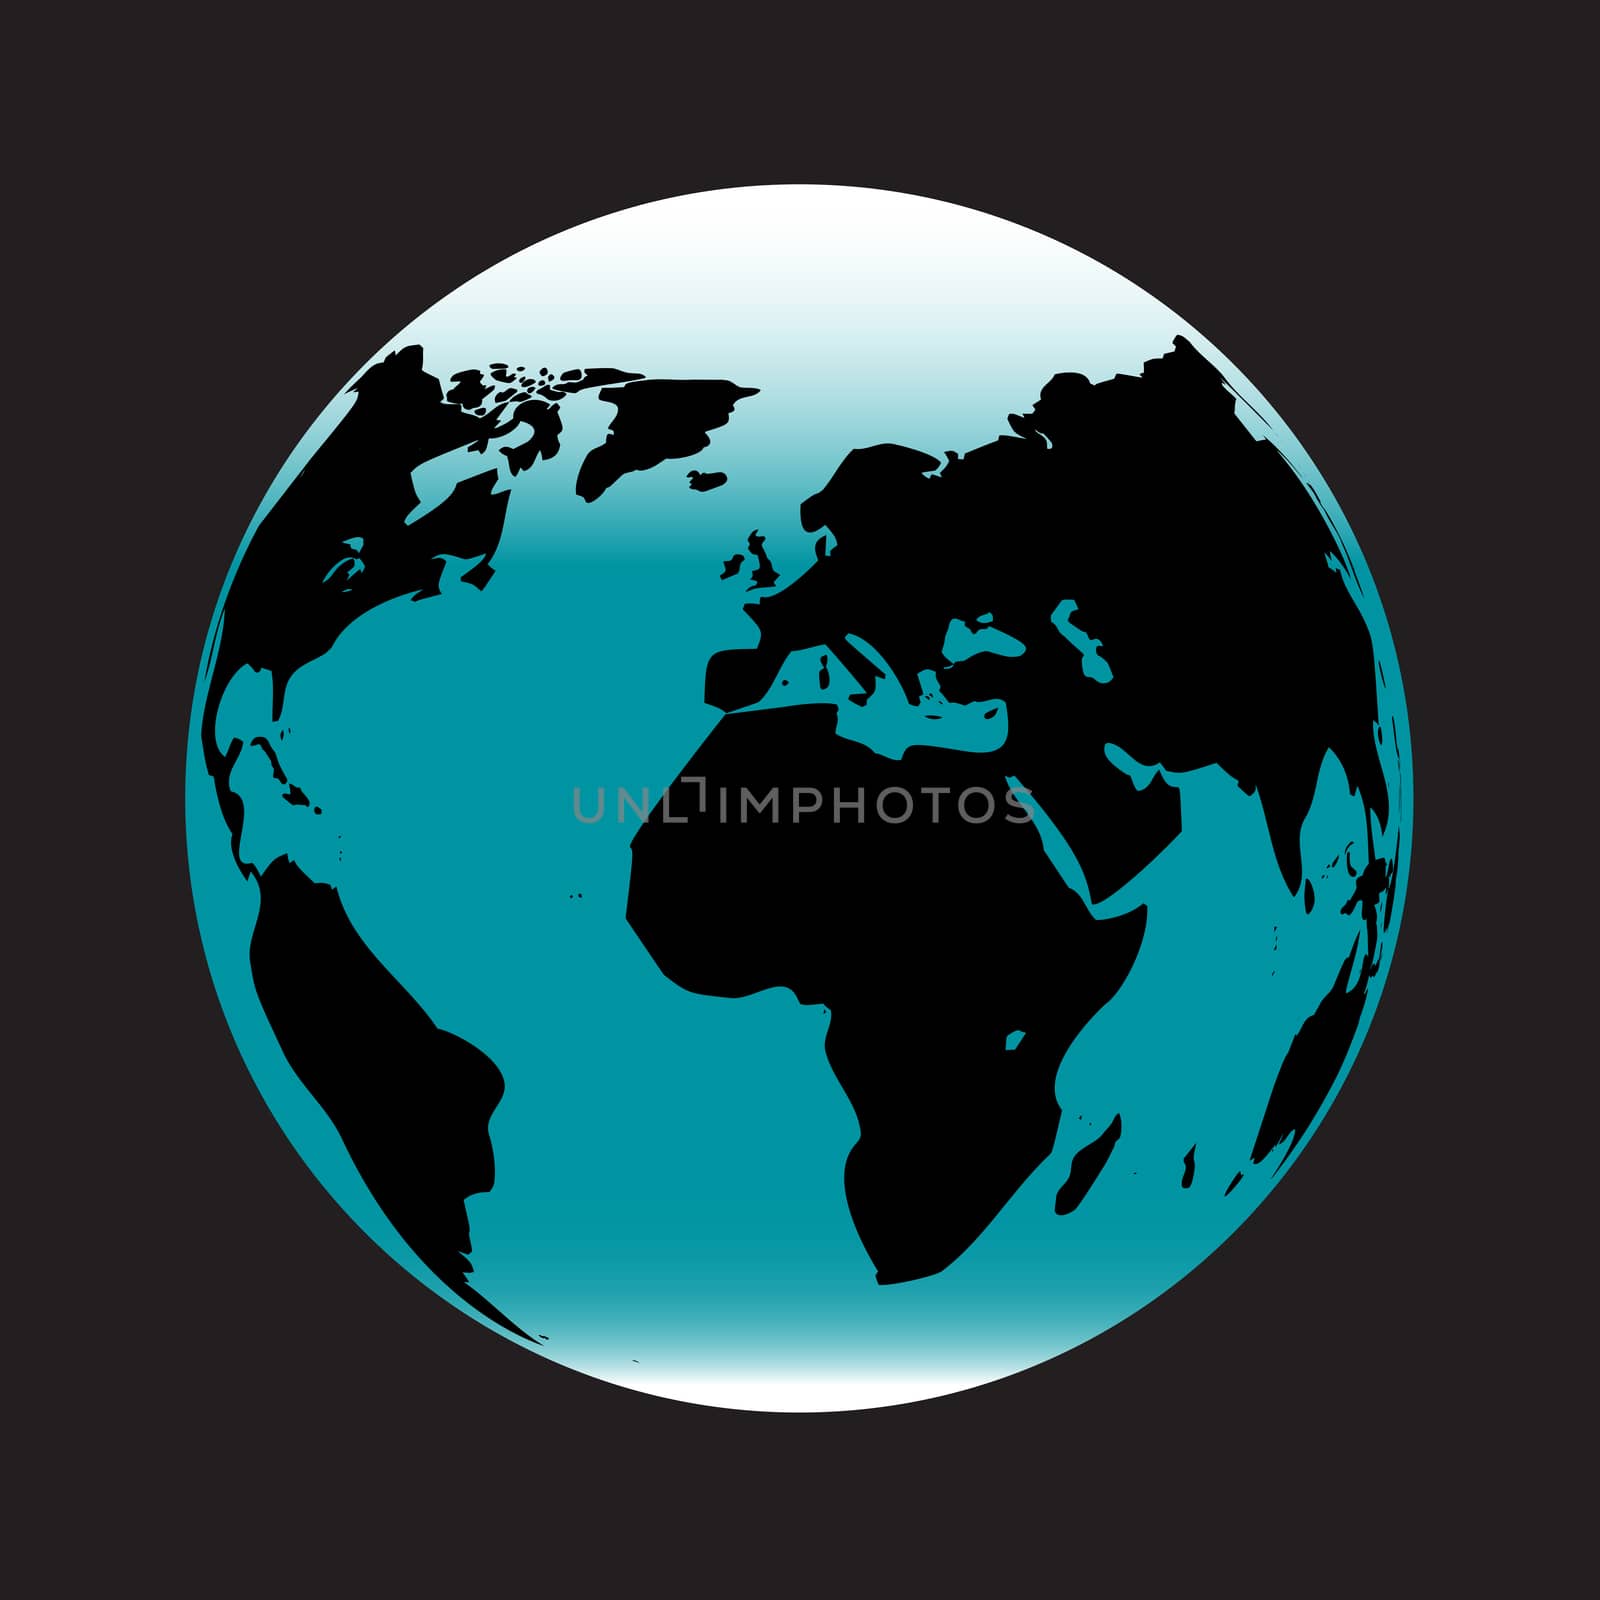 A representation of the planet Earth over a black background